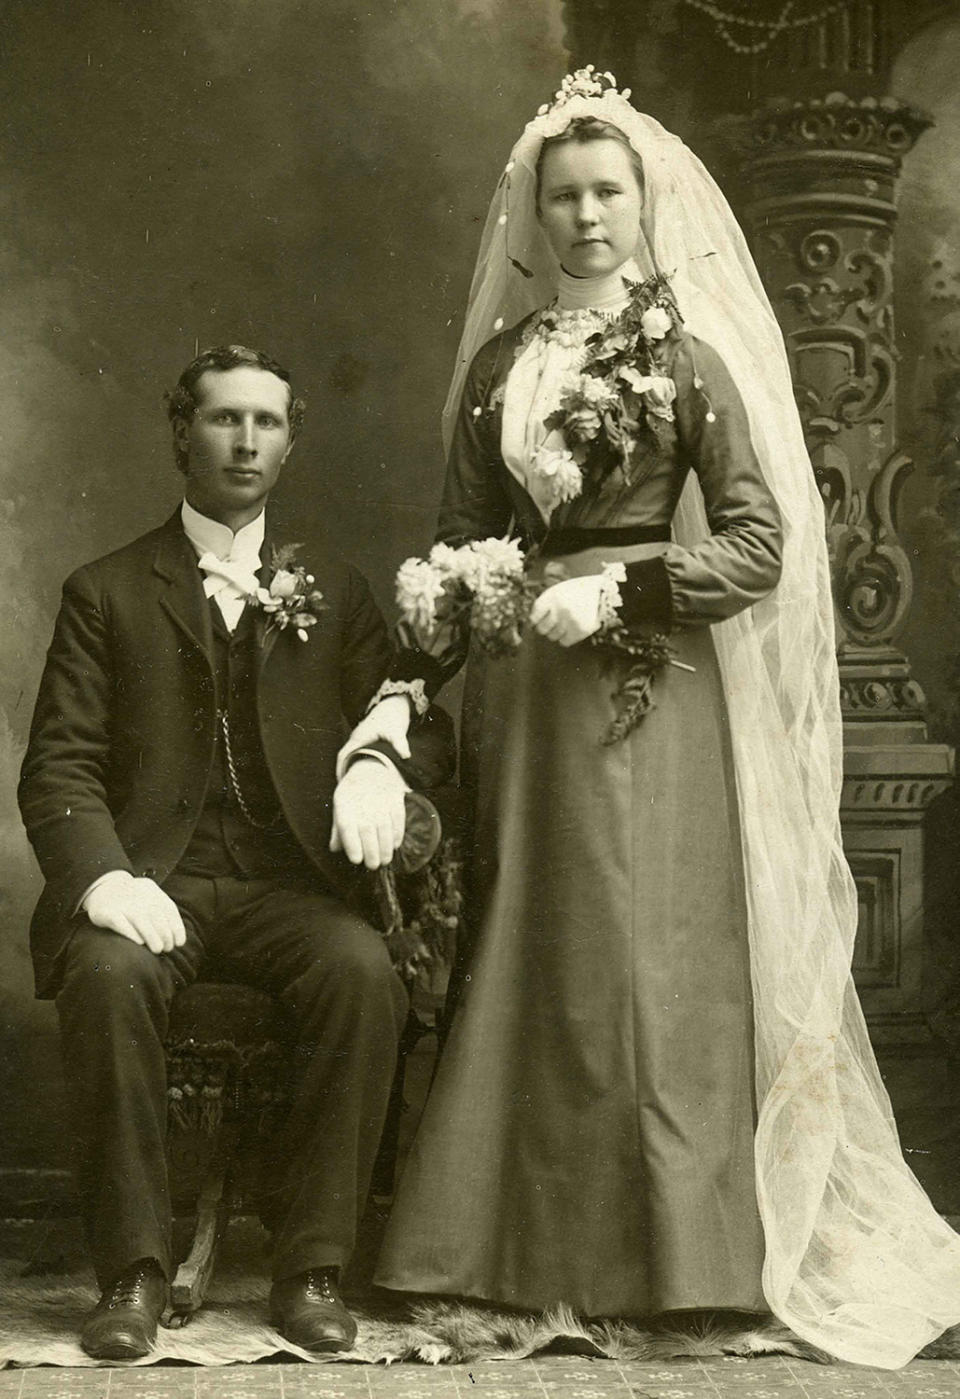 <p>Co-owner Frank Maresca came up with the idea for the exhibit having initially considered creating a book with the same name. (Pictured: Vintage wedding portraits from “I Do, I Do” exhibit) </p>